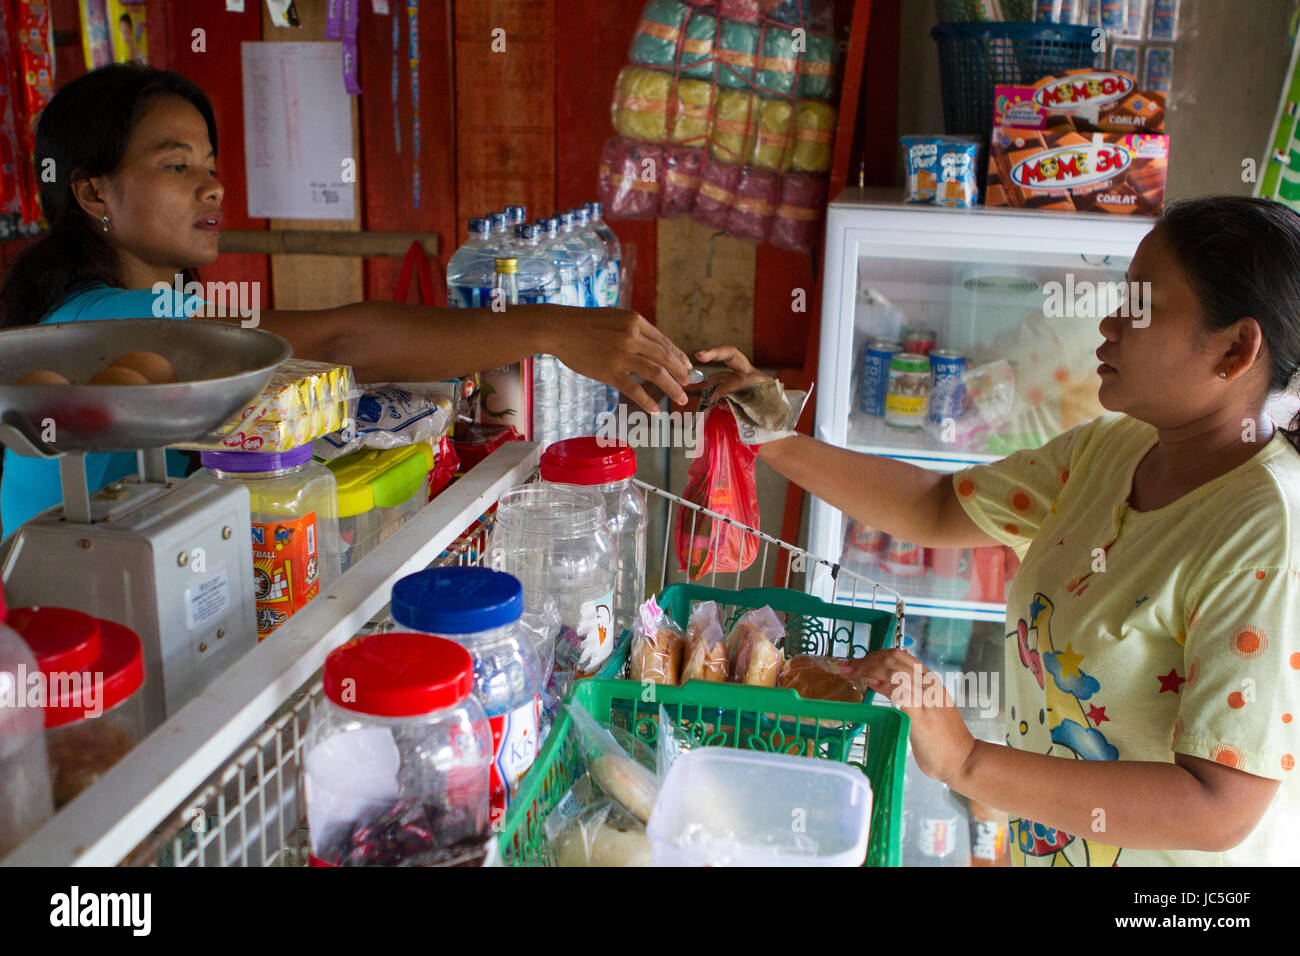 A women serves a customer in her shop, Indonesia, Asia. Stock Photo